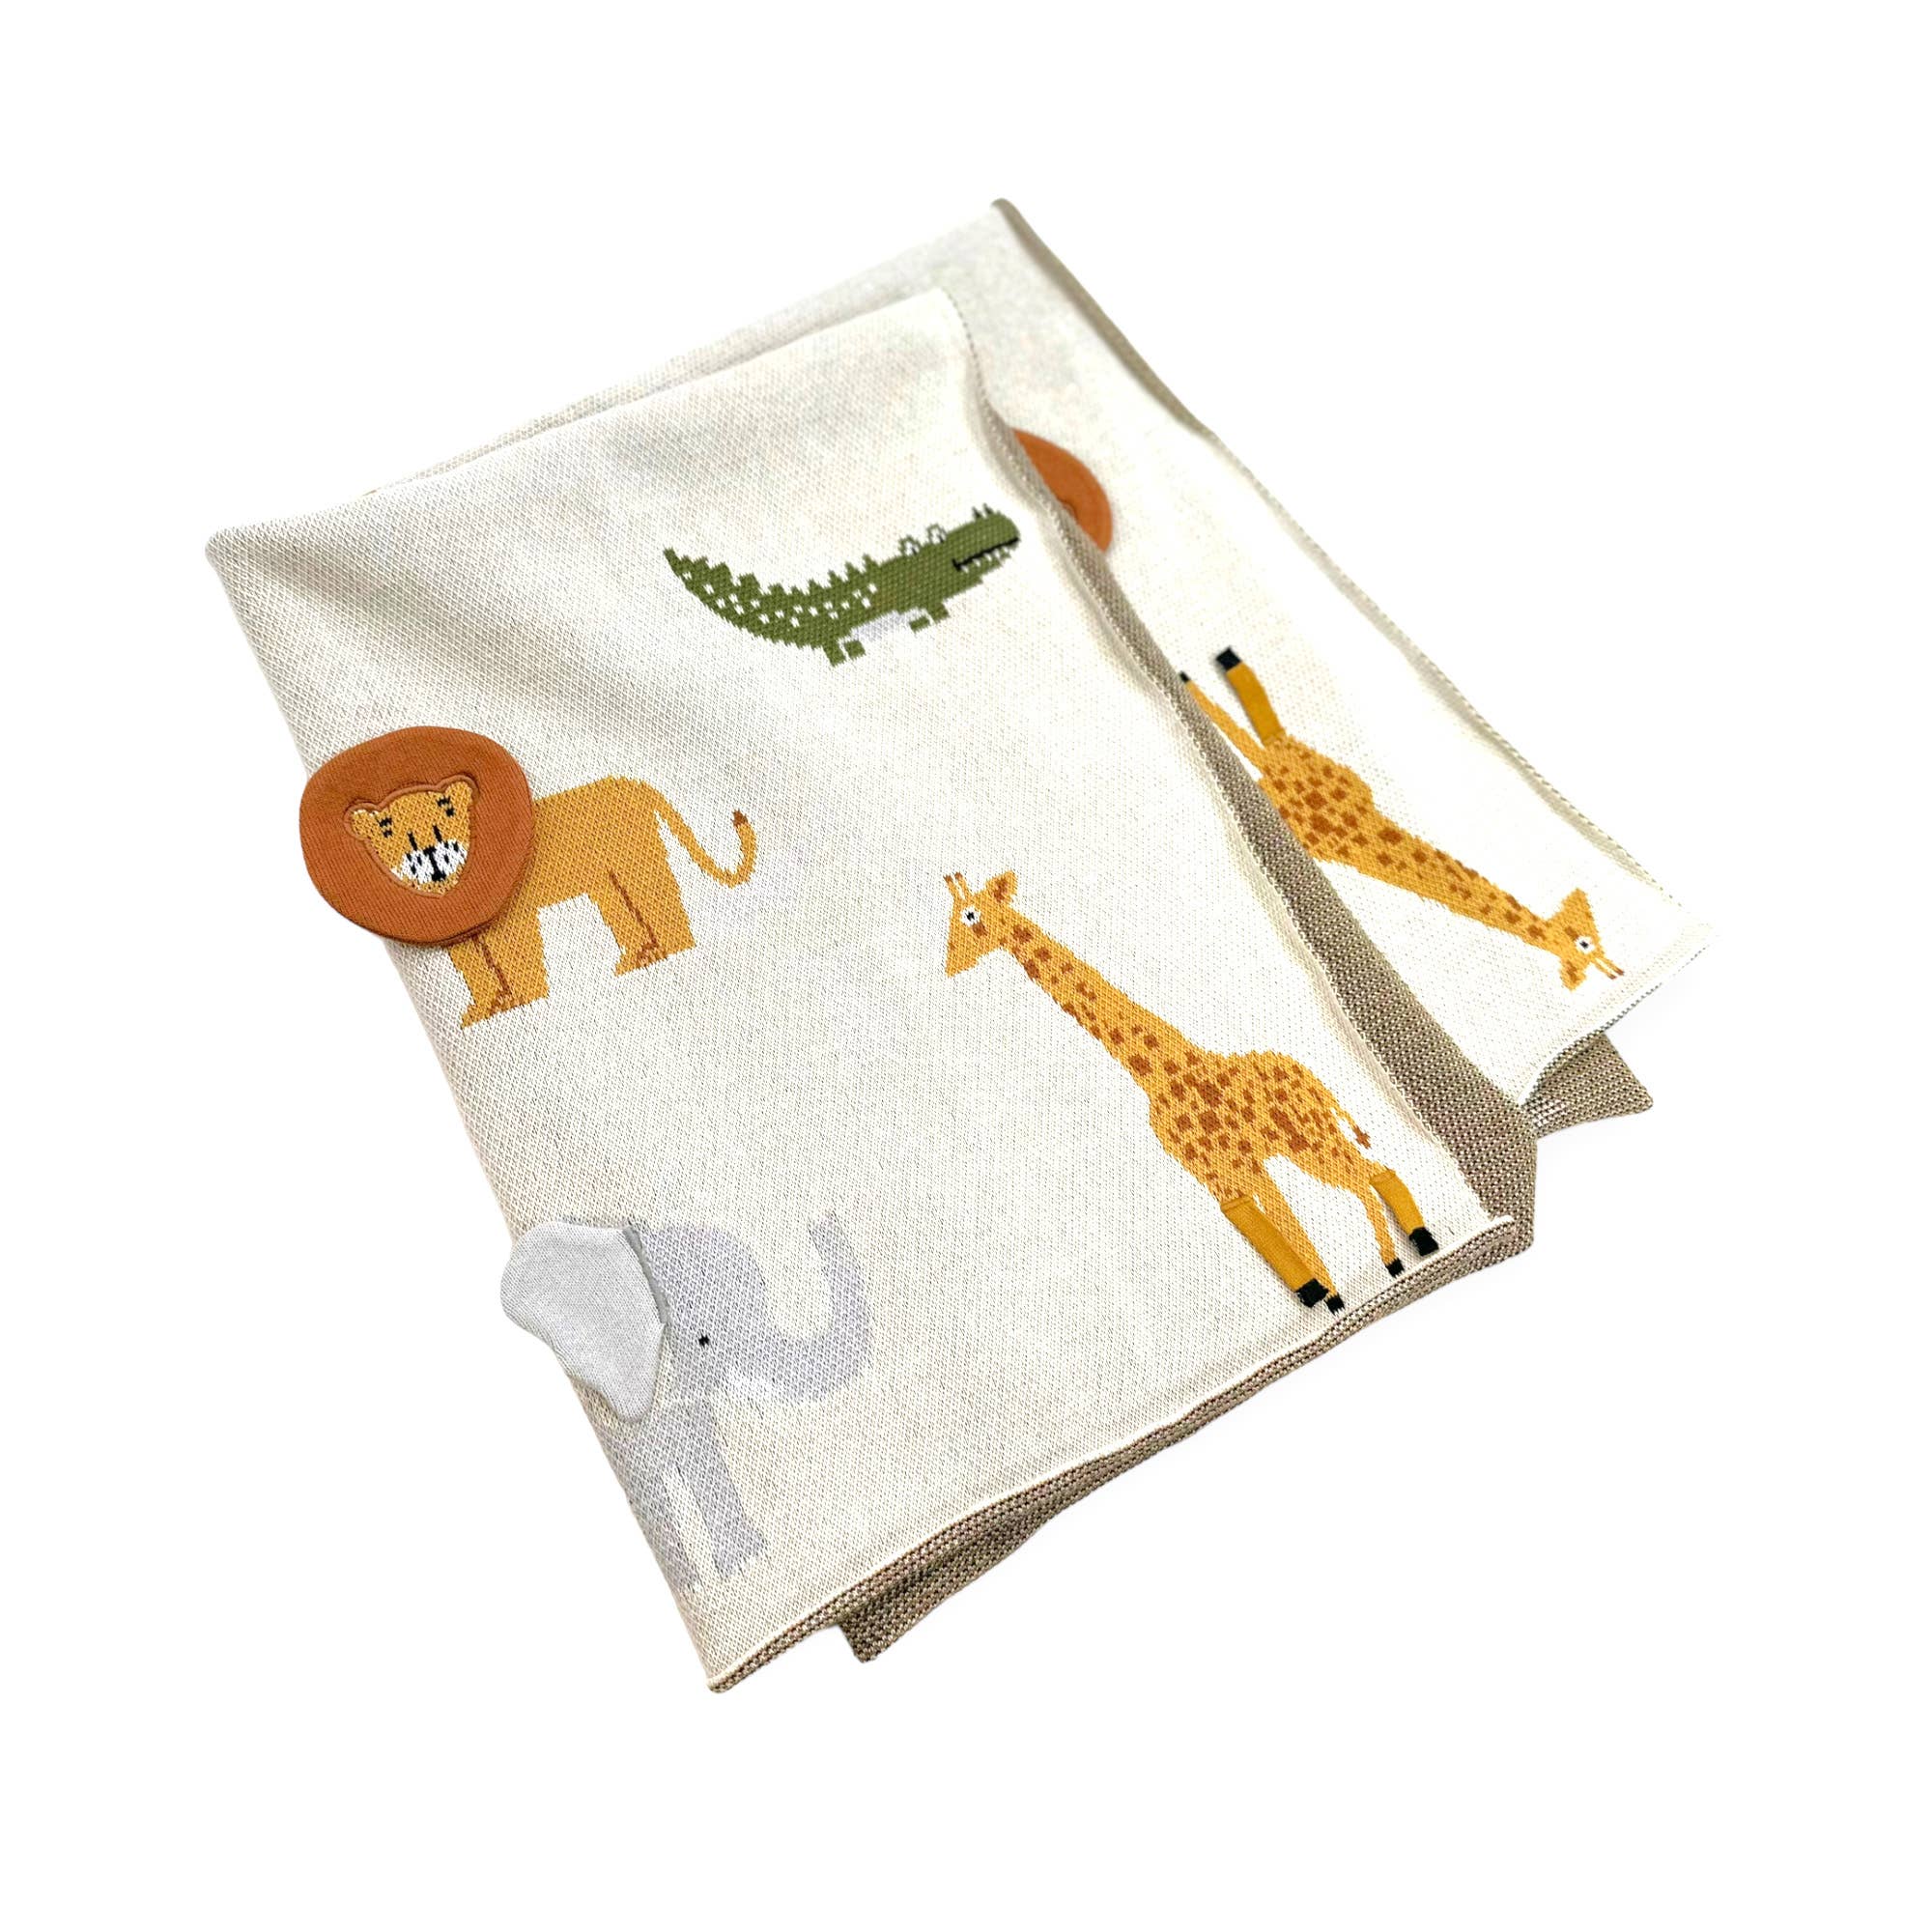 Experience the ultimate comfort and luxury with our Savannah-Organic 3D Jacquard Baby Blanket! Made with 100% organic cotton, this lightweight and breathable blanket is perfect for all seasons. Featuring a charming Savannah Safari motif, including playful elephants, fierce gators, majestic giraffes, and brave lions, this ultra-soft blanket will keep your little one cozy and stylish. A must-have for any baby!  Non-toxic & natural fabrication for sensitive skin. Size: 30x42